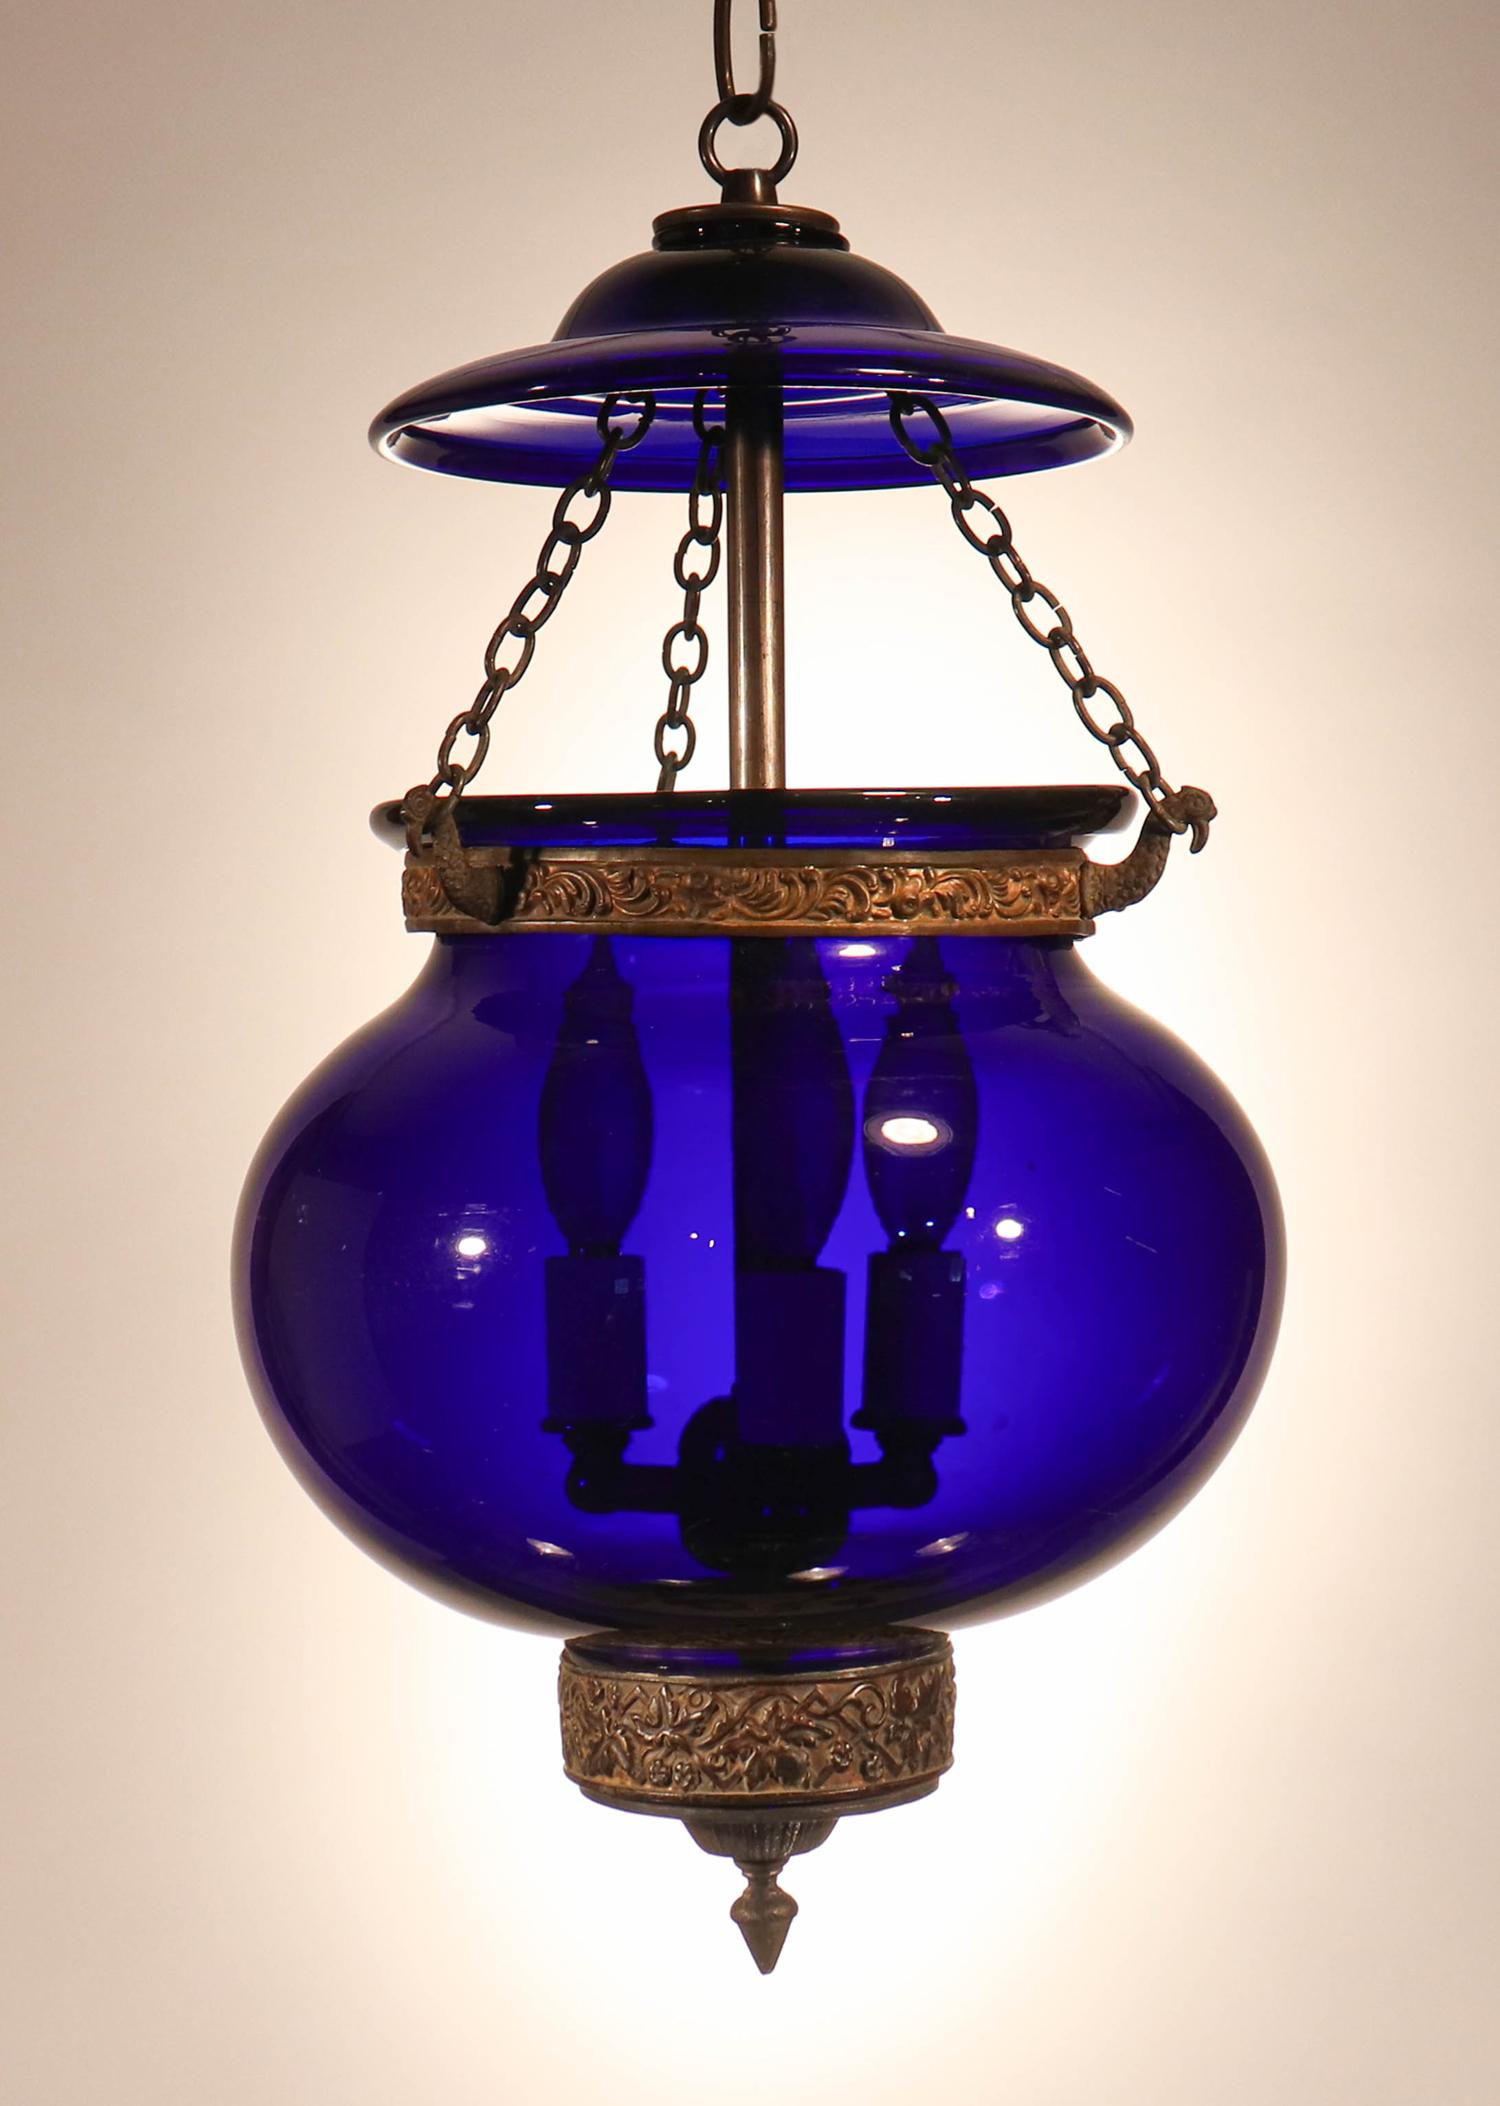 A deep, cobalt blue hand blown glass globe bell jar lantern from England, circa 1860. This authentic antique pendant features its original brass band, chains and finial/candleholder base. Please note that the very bottom of the bottom portion of the